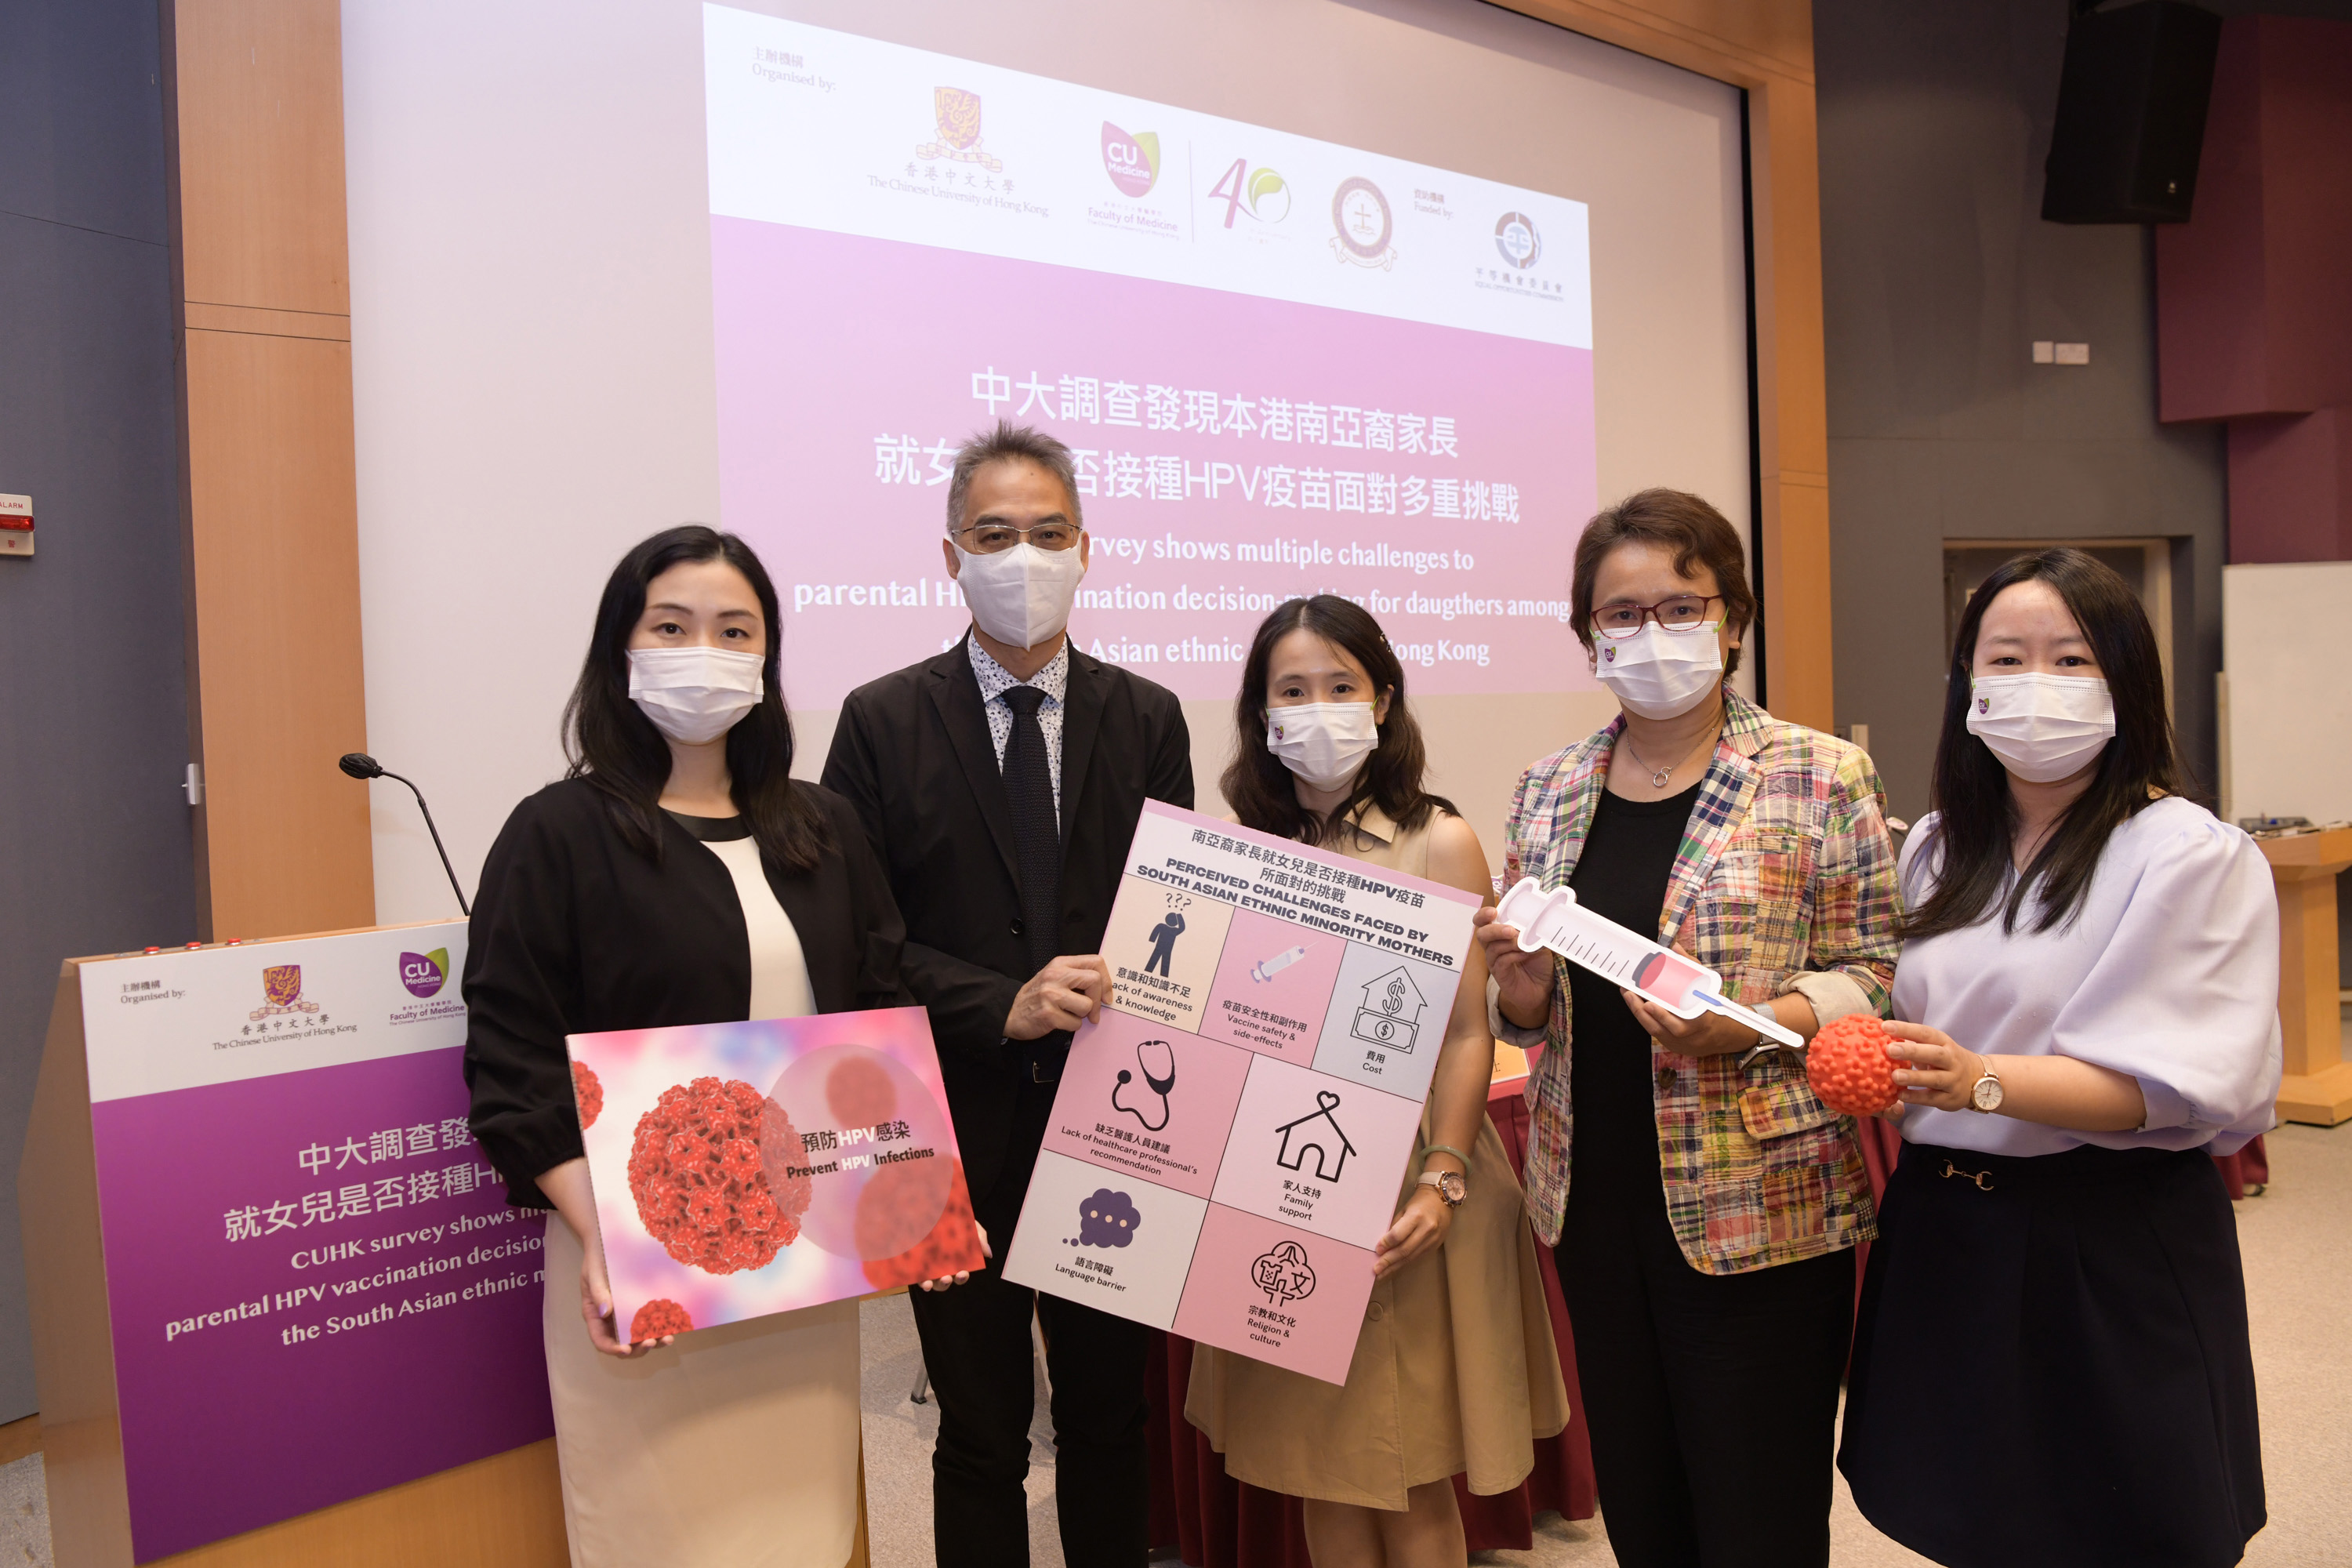 From left：Ms. Doris TSUI, Acting Head (Policy, Research and Training); Dr. Ferrick CHU, Executive Director (Operations), Equal Opportunities Commission; Dr. Dorothy CHAN, Assistant Professor; Professor Winnie SO; and Ms. Pinky LEE, PhD candidate, from The Nethersole School of Nursing at CU Medicine. 